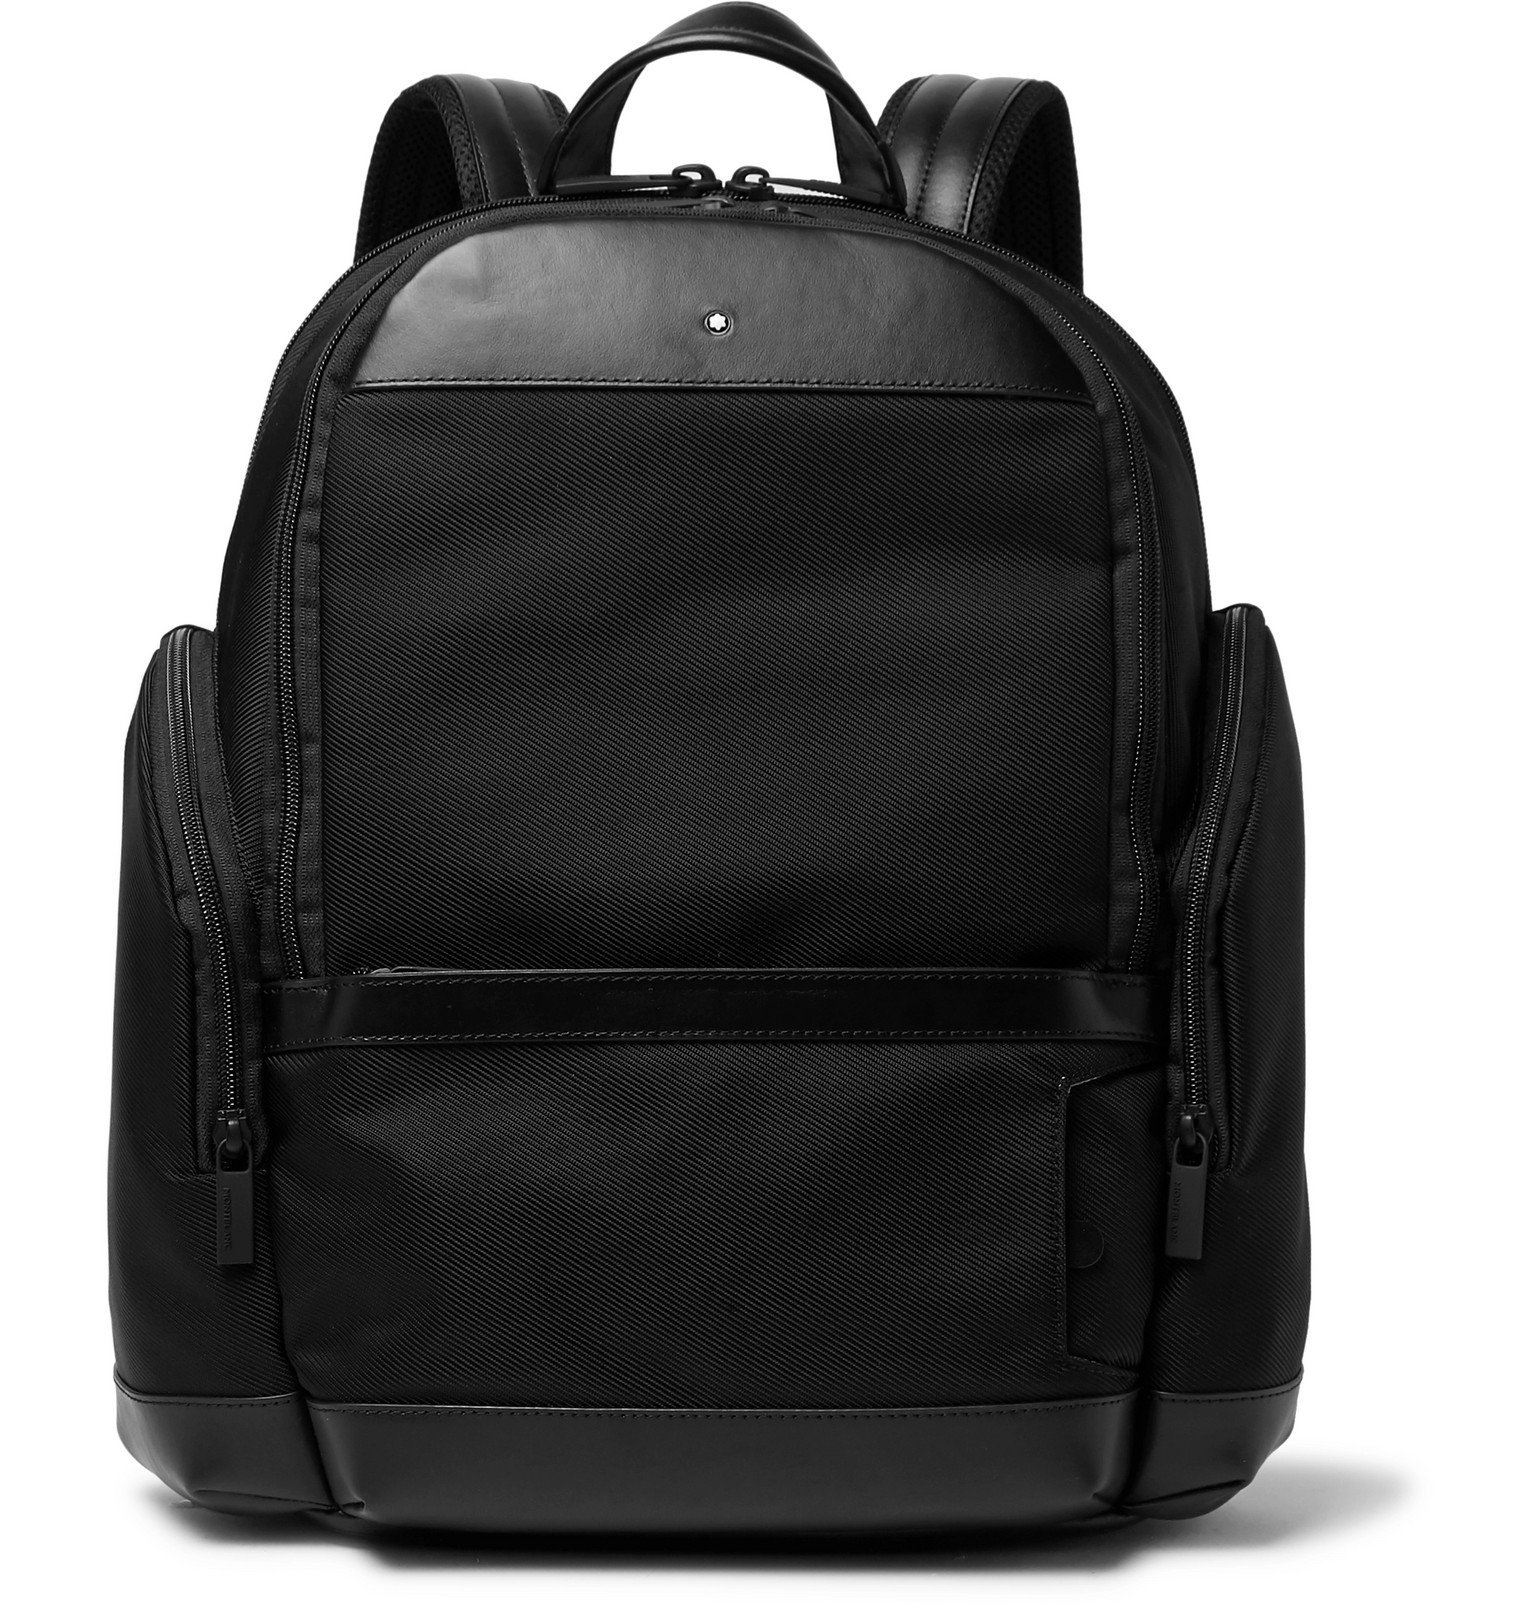 Montblanc - Nightflight Leather-Trimmed Canvas Backpack - Black Montblanc